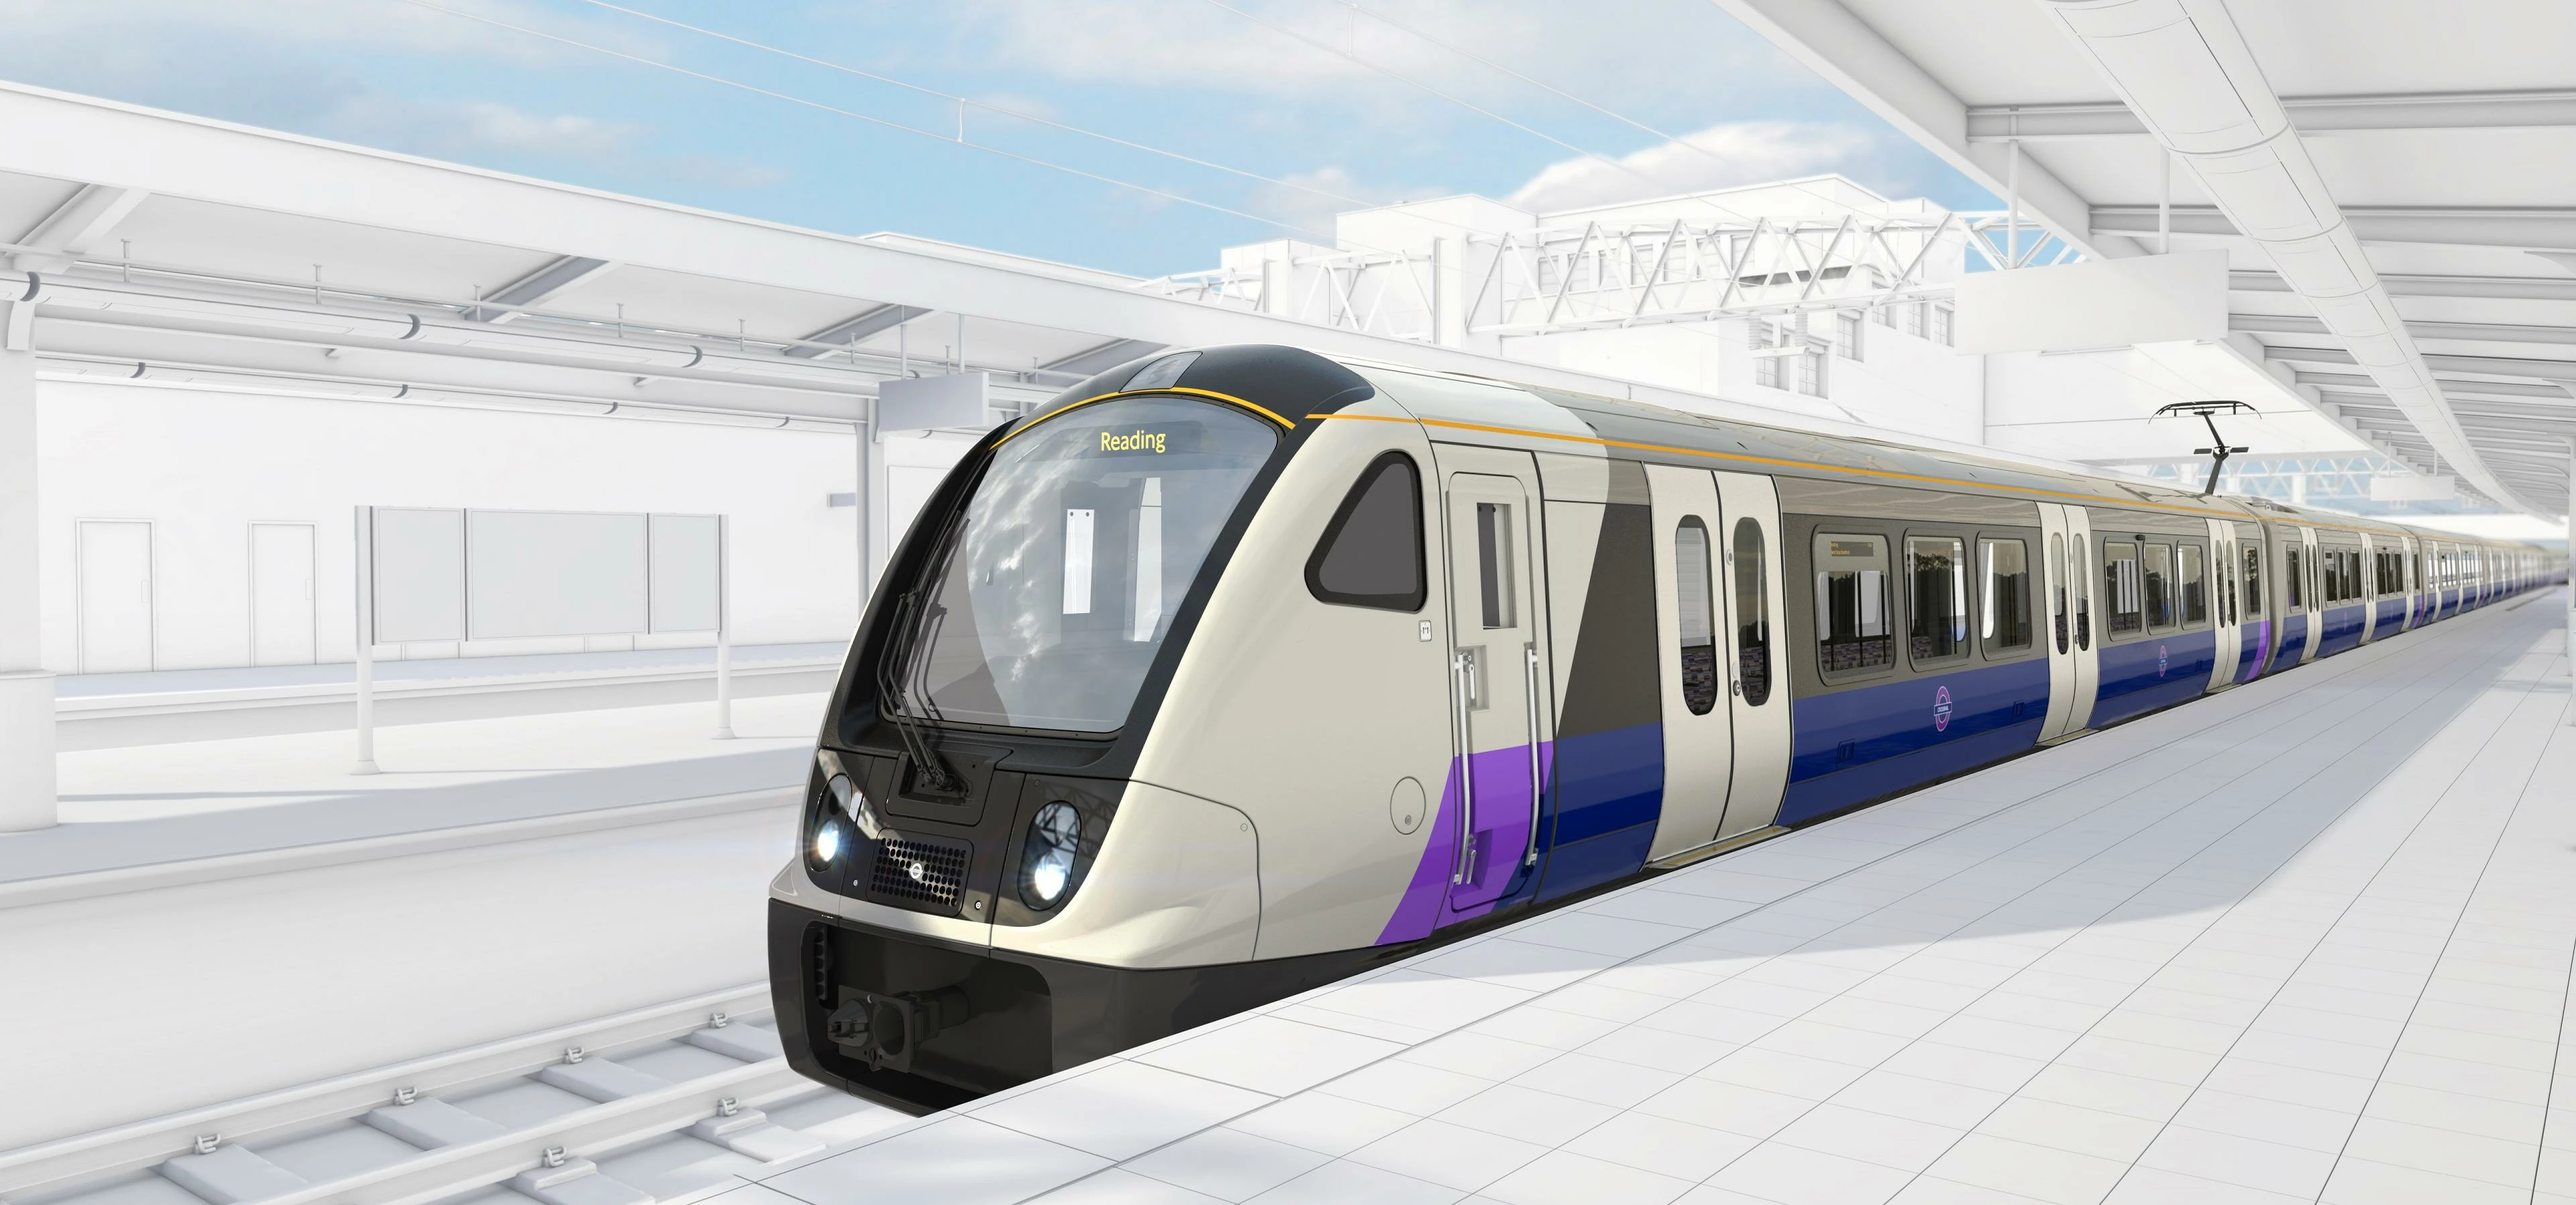 An artist's impression of the Crossrail trains that will be serviced using Mechan's equipment at Old